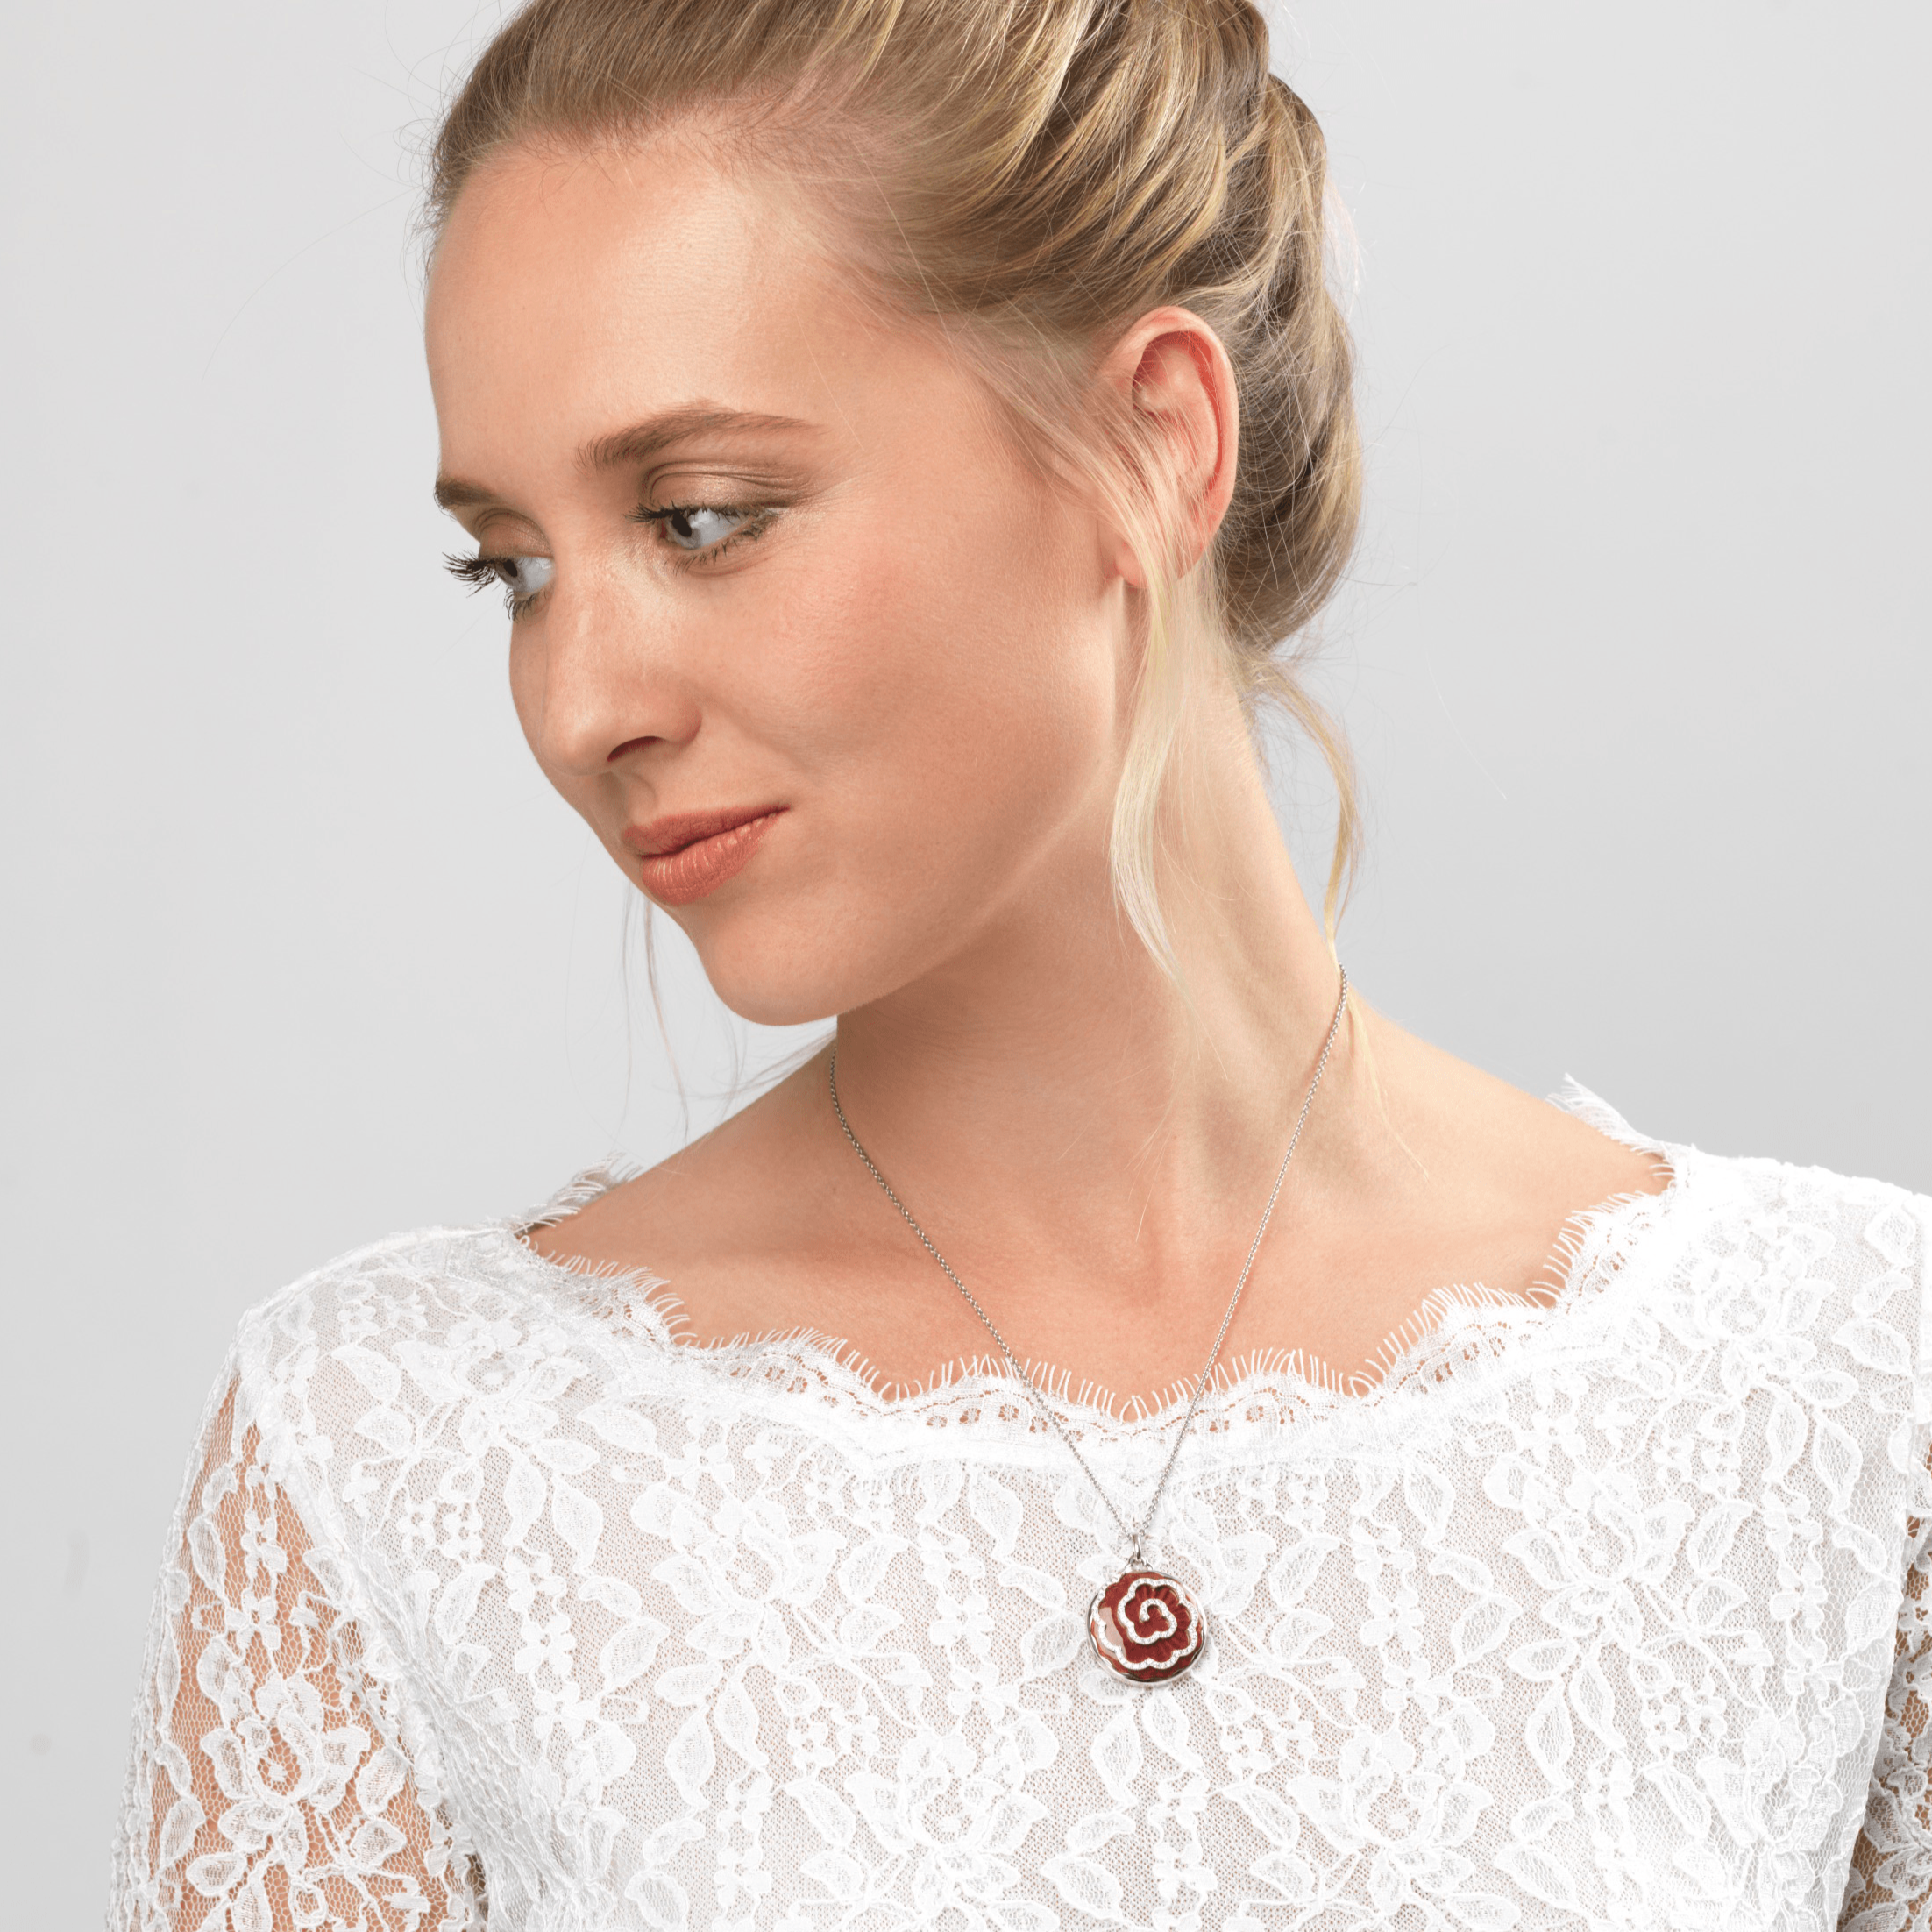 Model wearing an 18 ct round locket with a red guilloche enamel background and daimonds aranged in a floral design, on an 18 ct white gold chain